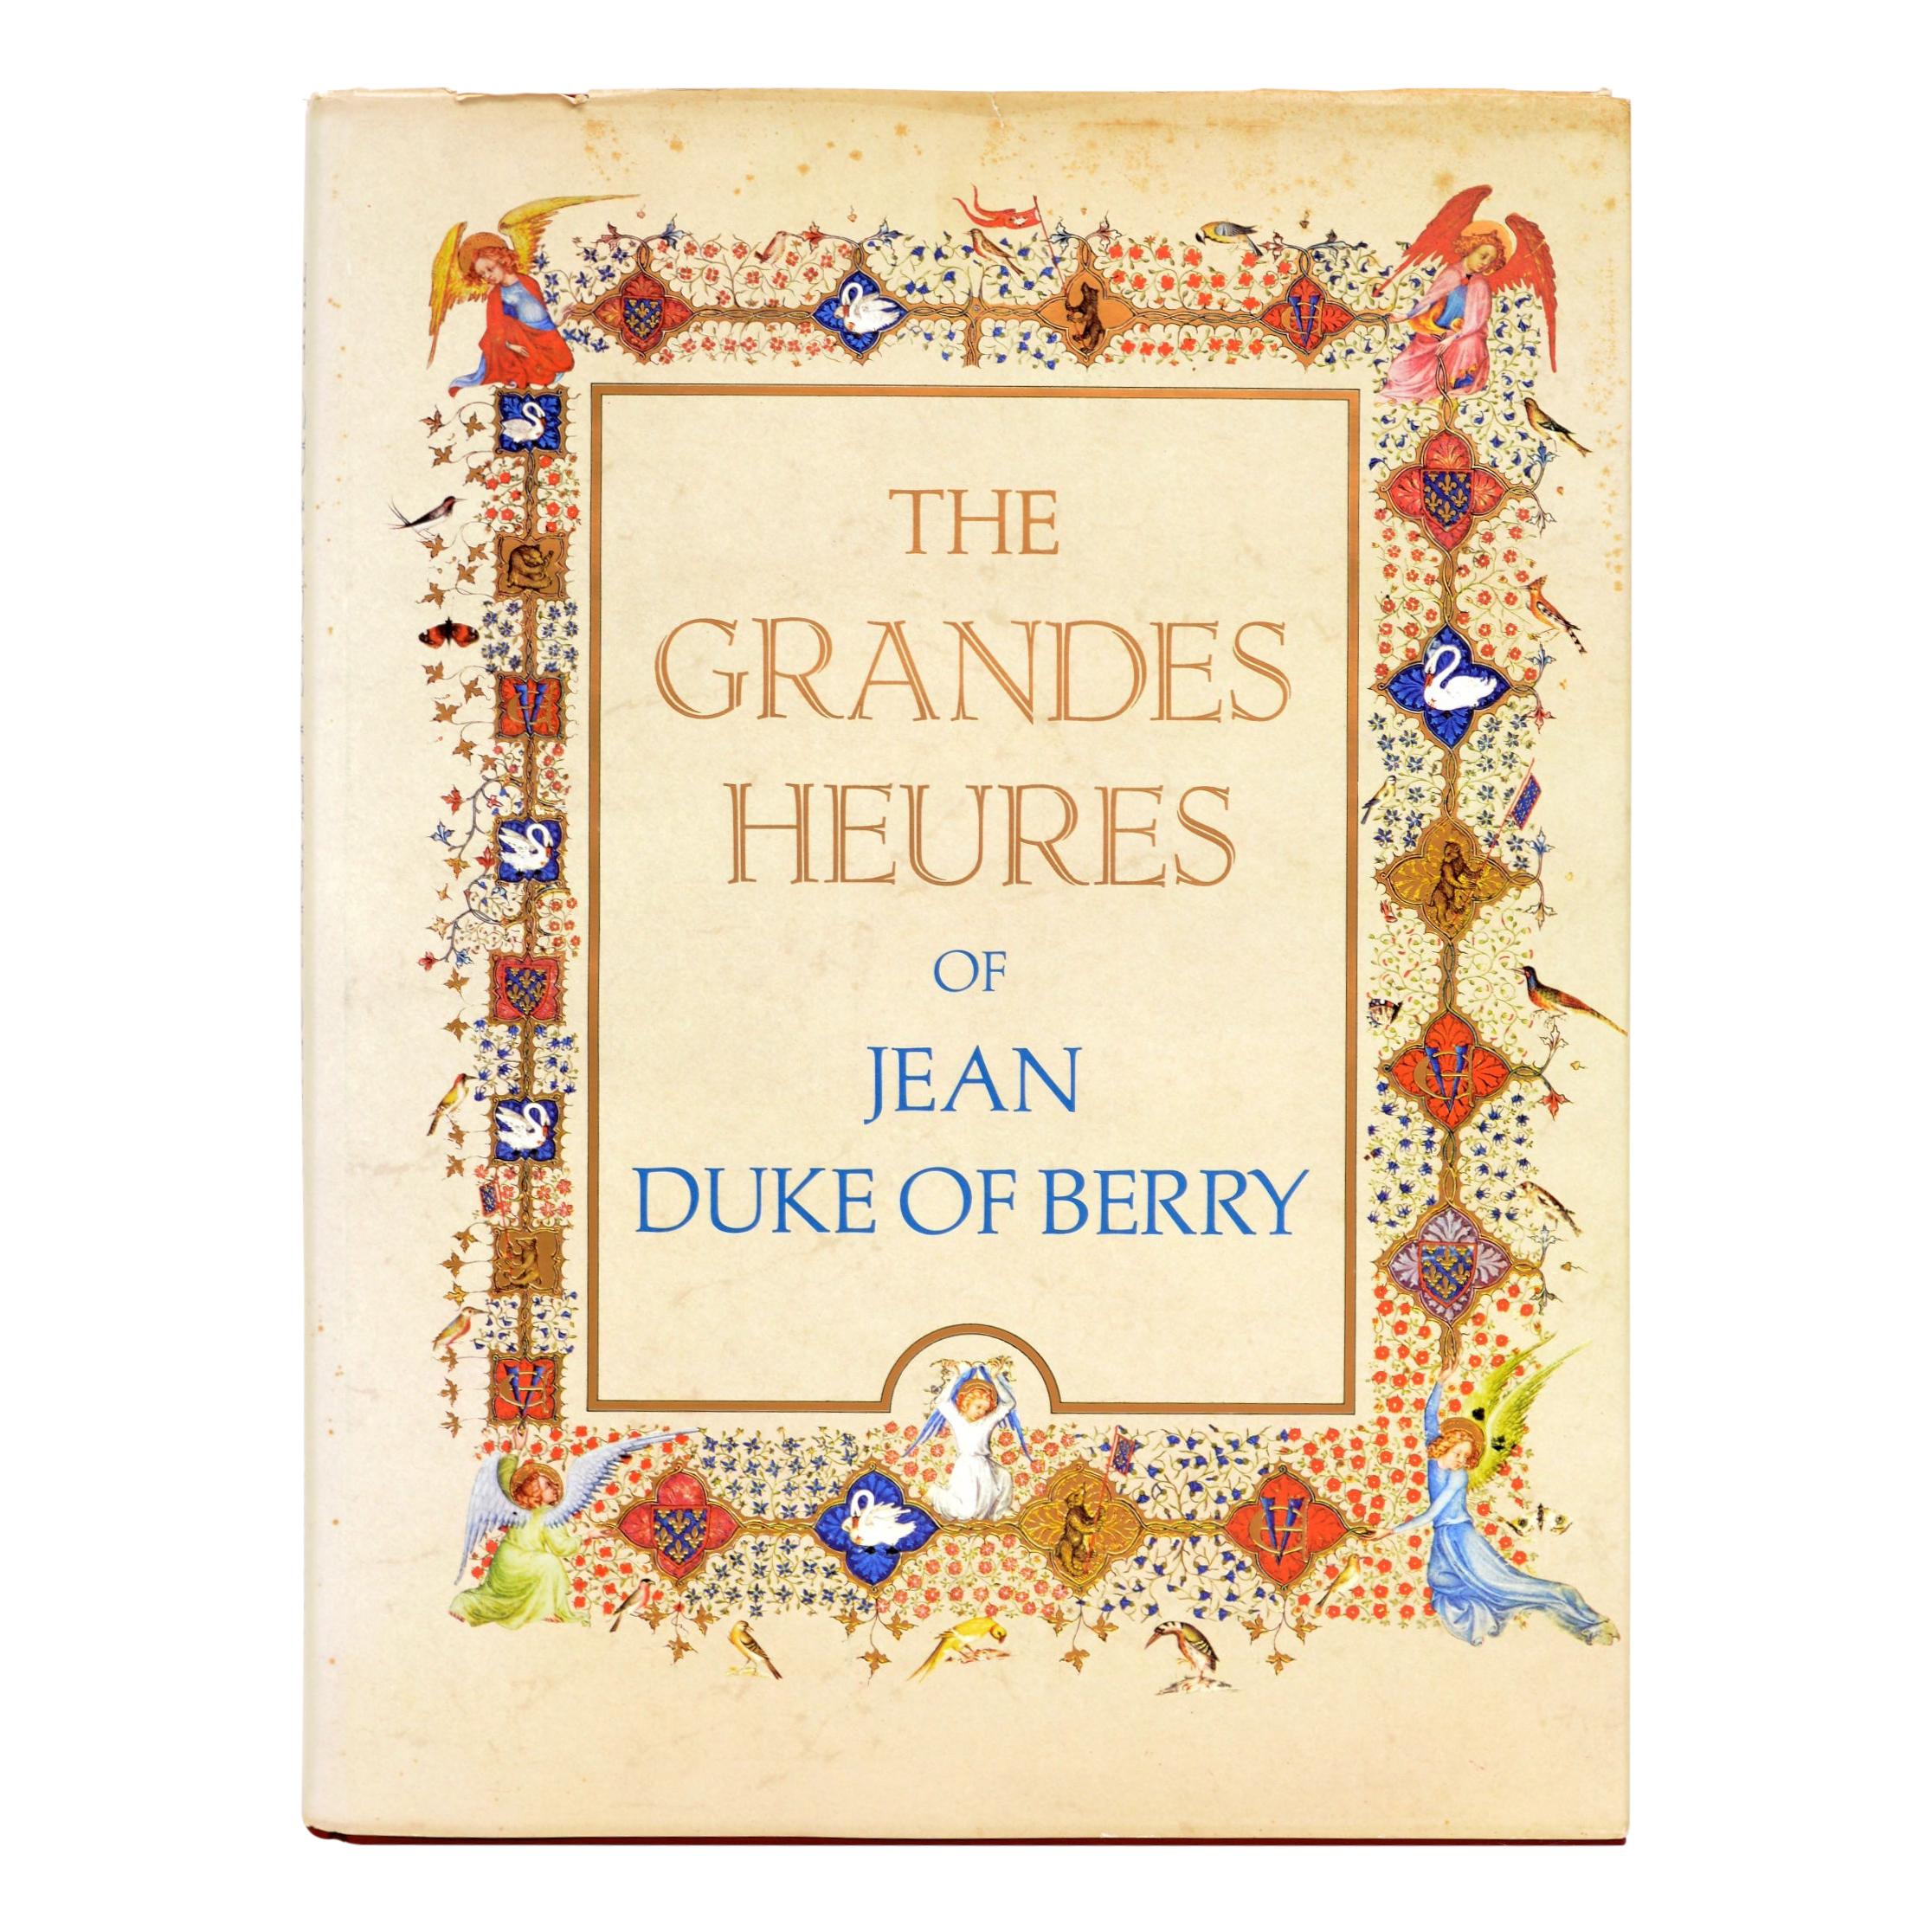 The Grandes Heures of Jean, Duke of Berry by Marcel Thomas, 1st Edition